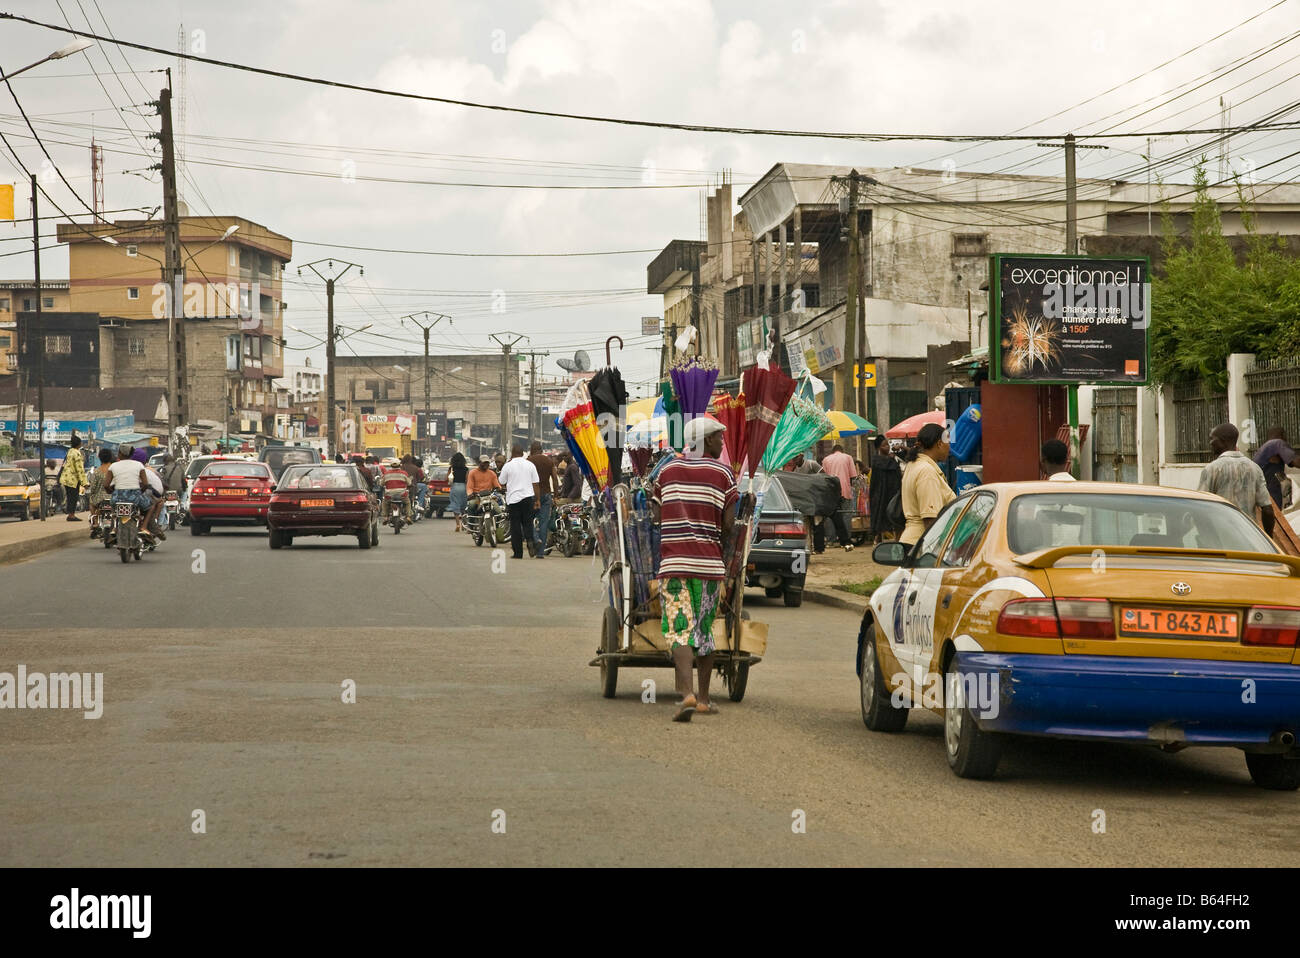 Traffic in city centre, Douala, Cameroon, Africa Stock Photo